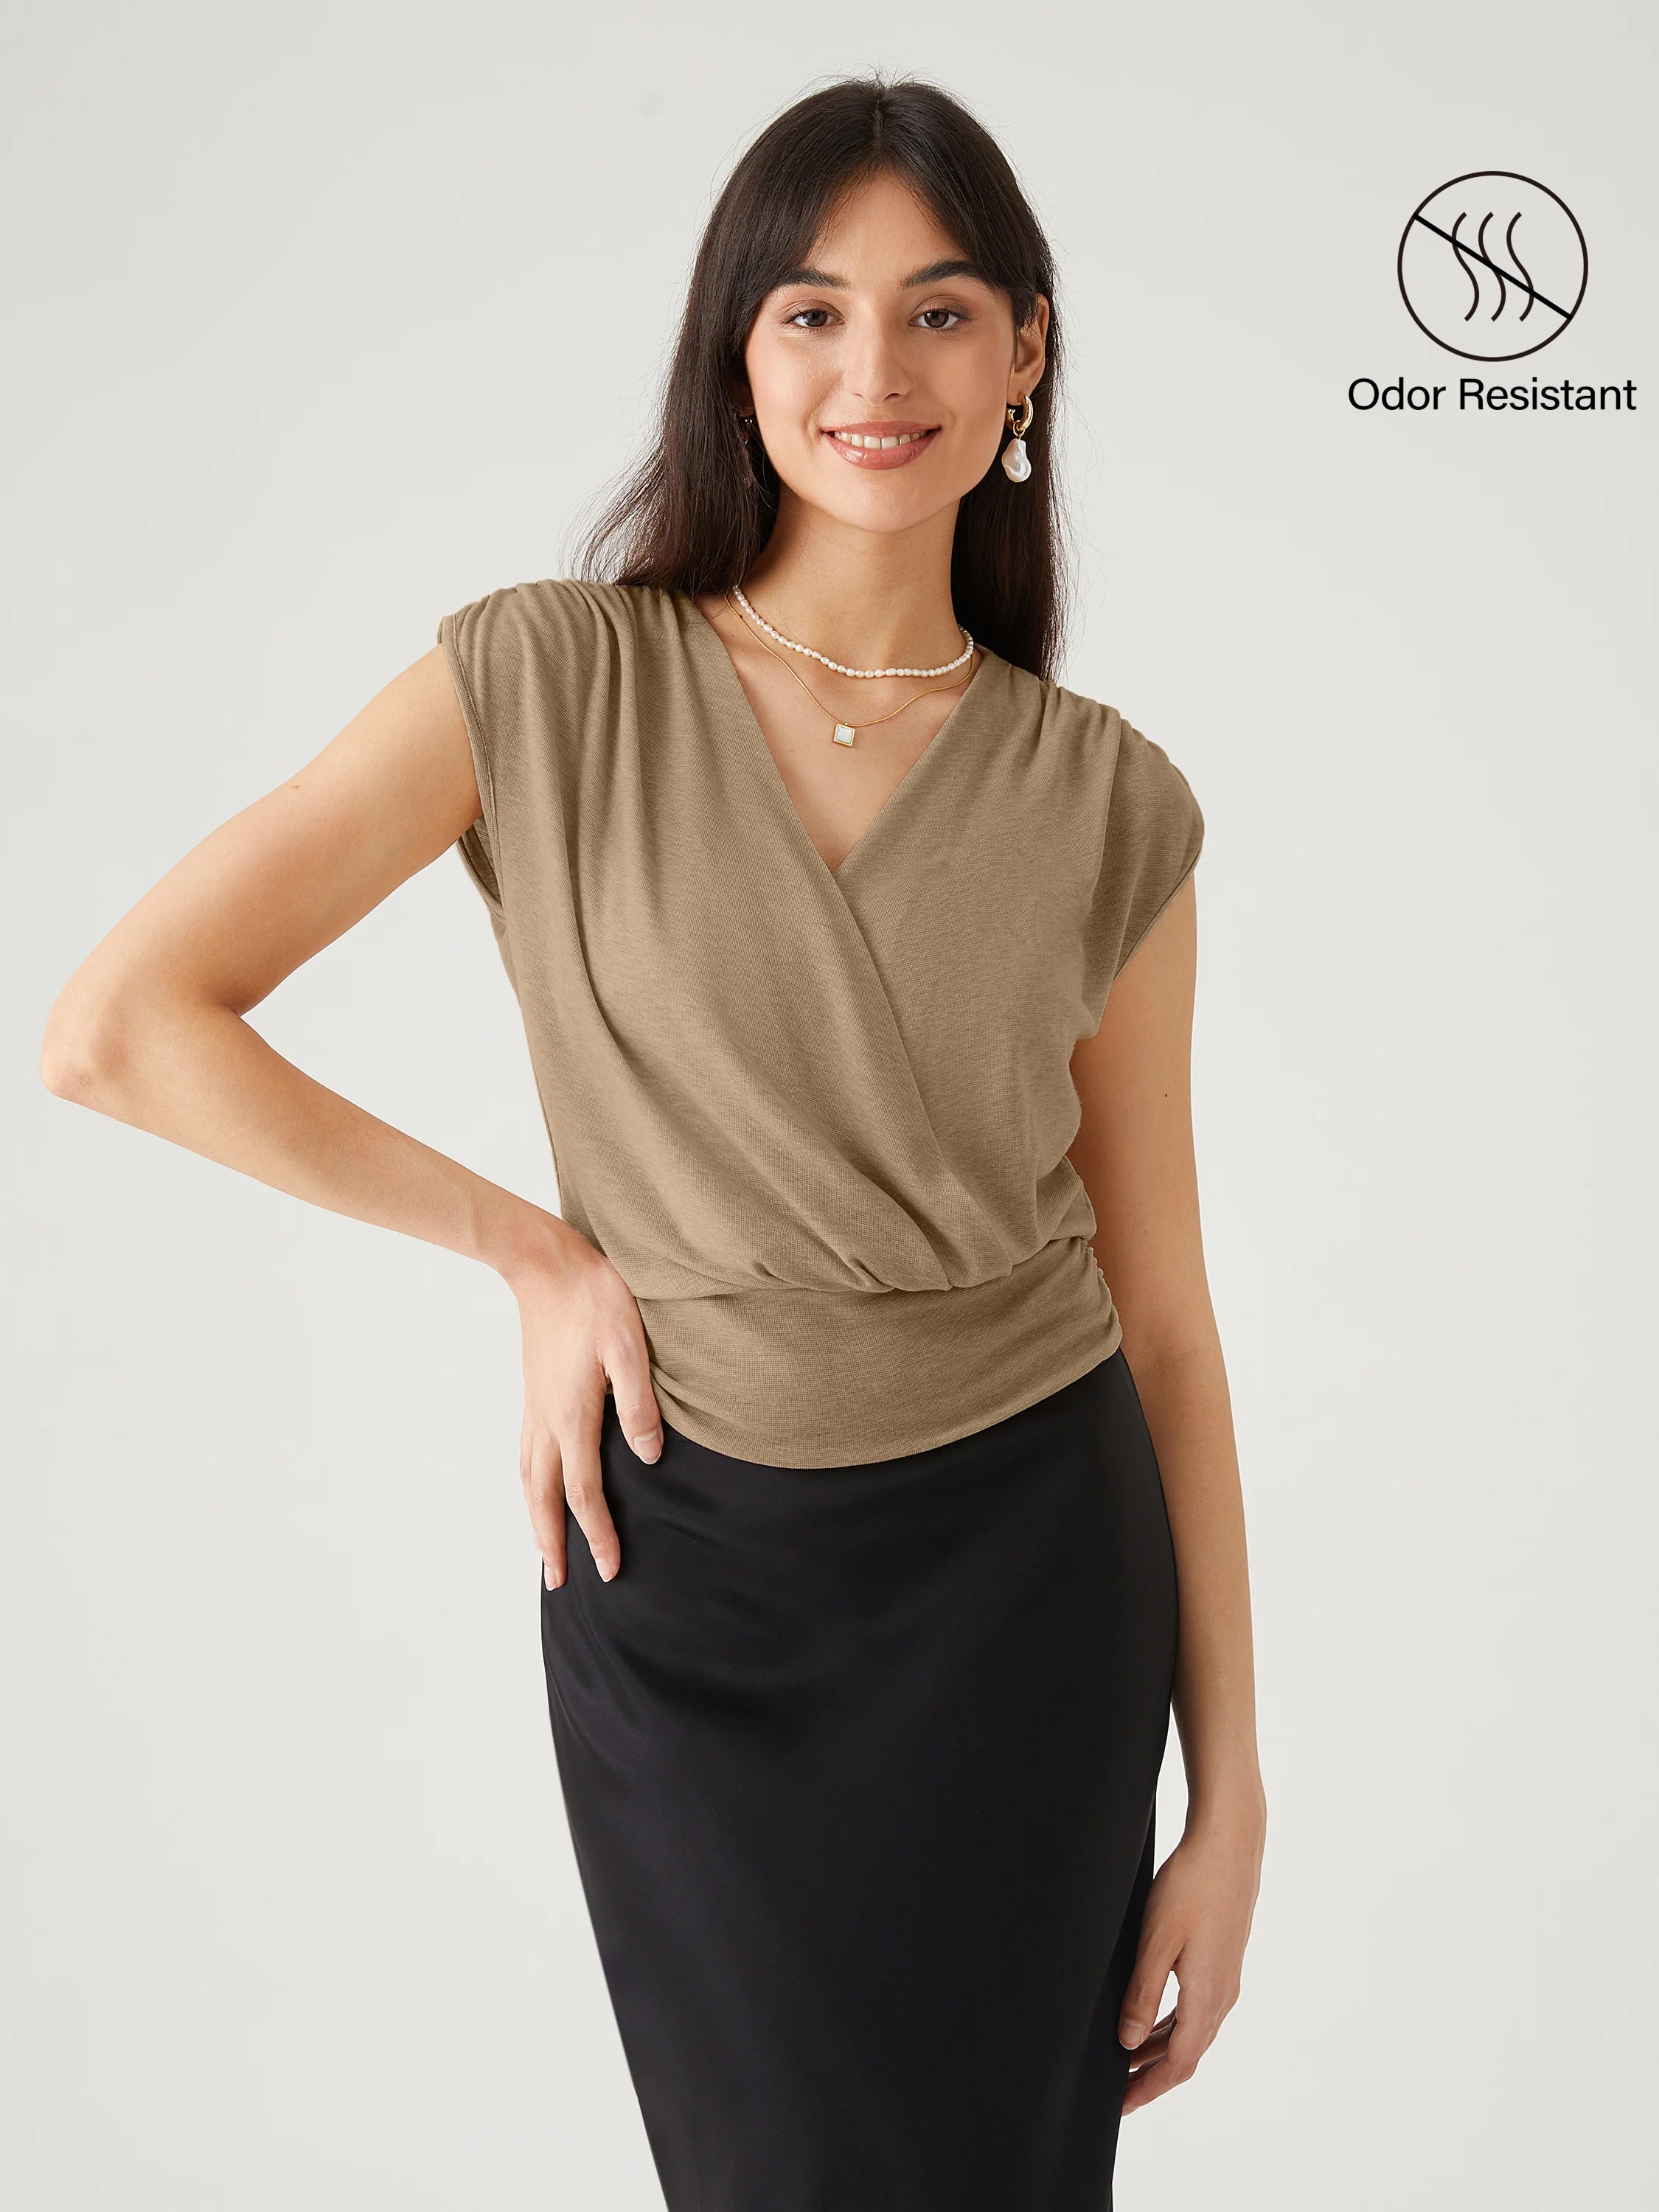 New Arrival Sustainable Clothing | OGLmove – Page 2